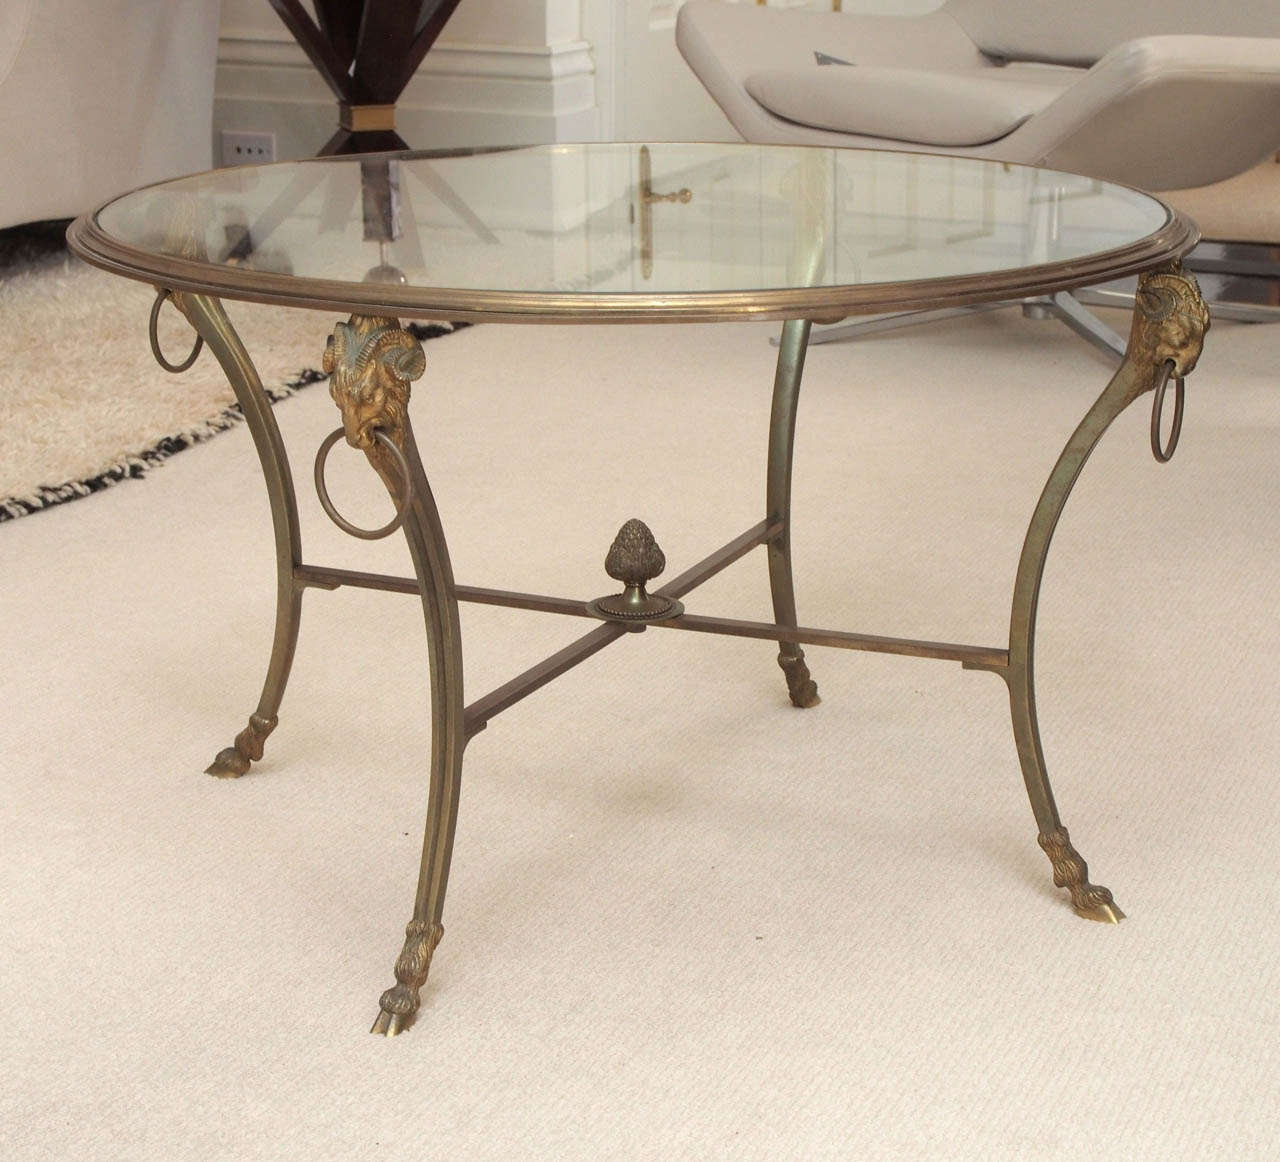 Low circular table in gilt bronze; elegantly detailed with hoof feet, ram heads and acorn finial at the stretchers; clear glass plateau